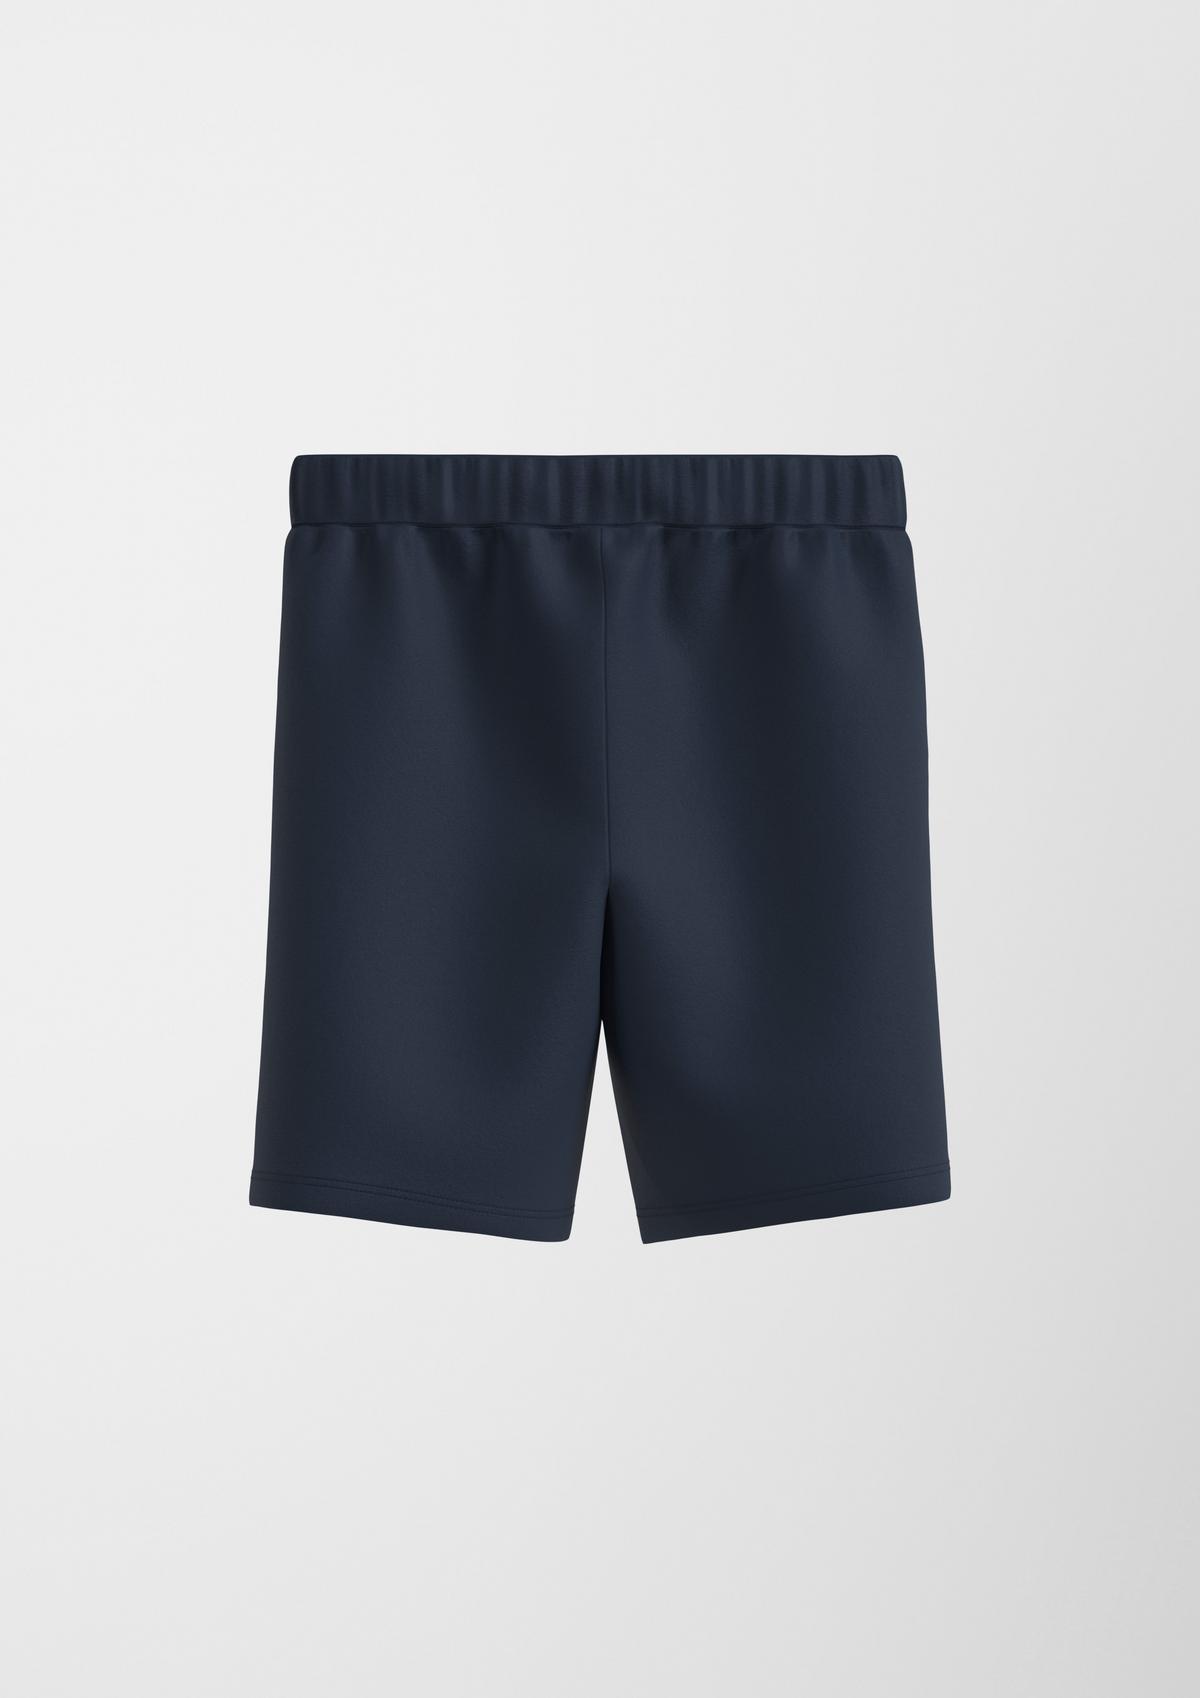 s.Oliver Regular fit: Jersey shorts made of cotton